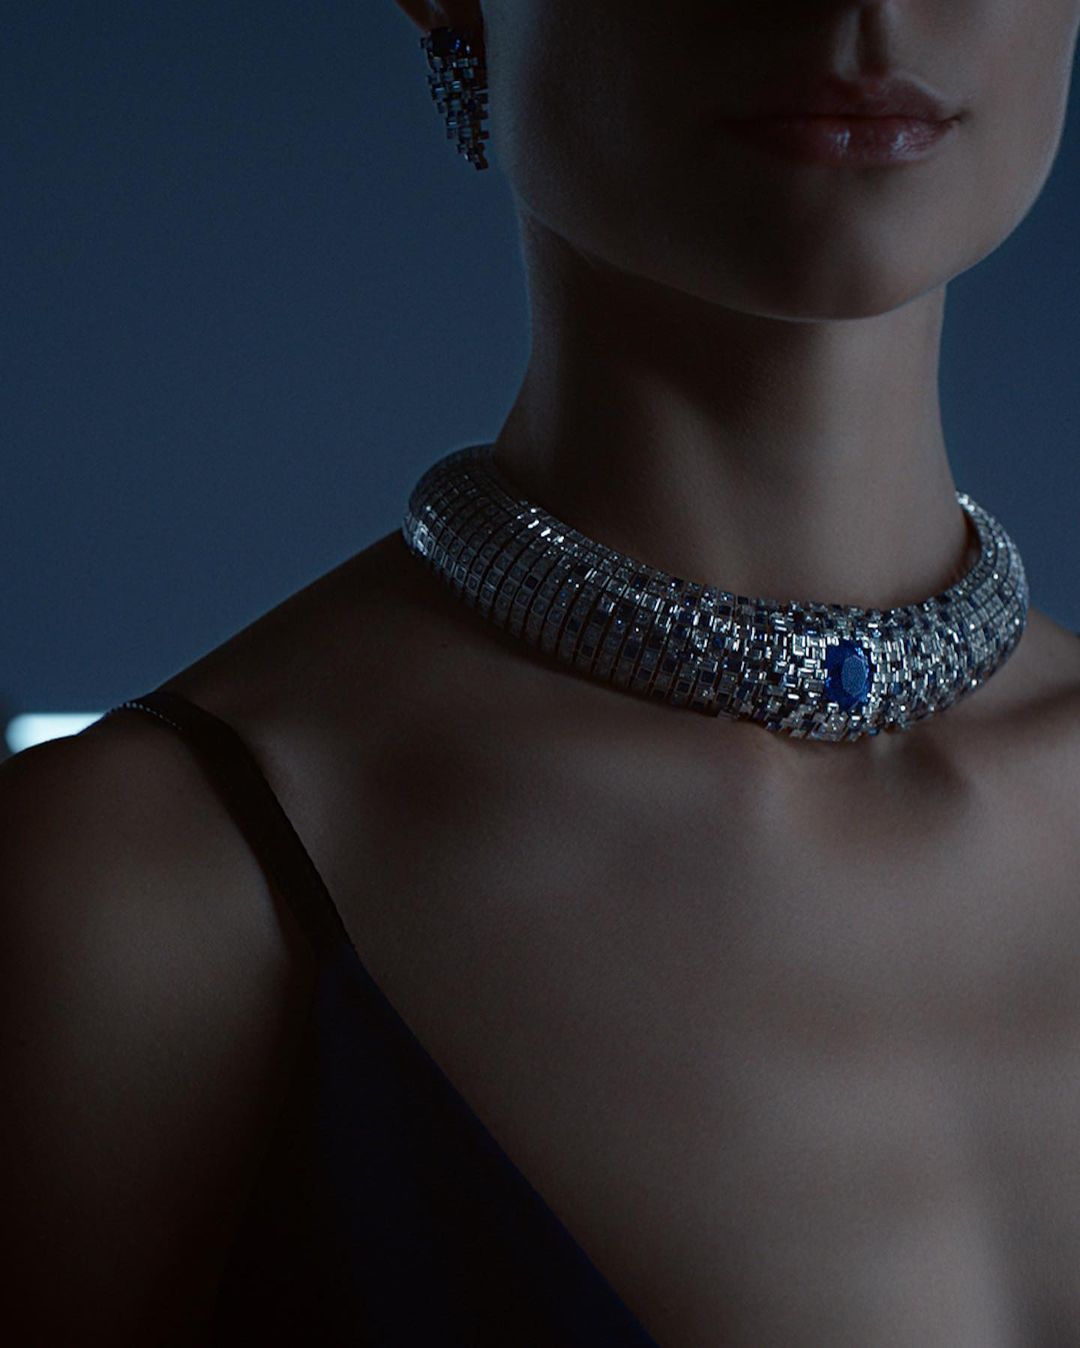 The Second Louis Vuitton High Jewellery Collection, 'Stellar Times